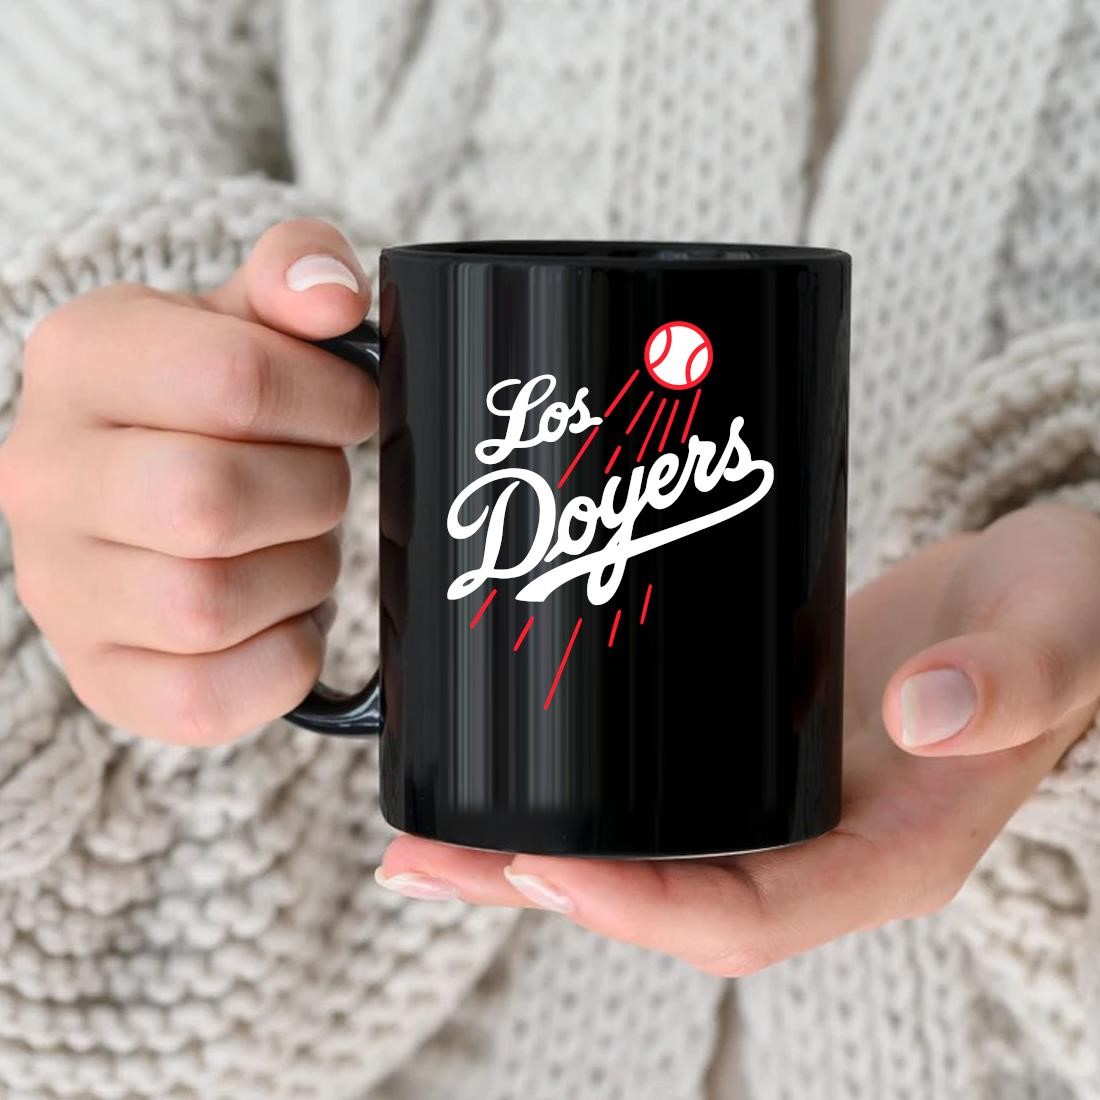 Official Los Angeles Dodgers Los Doyers Shirt, hoodie, sweater, long sleeve  and tank top